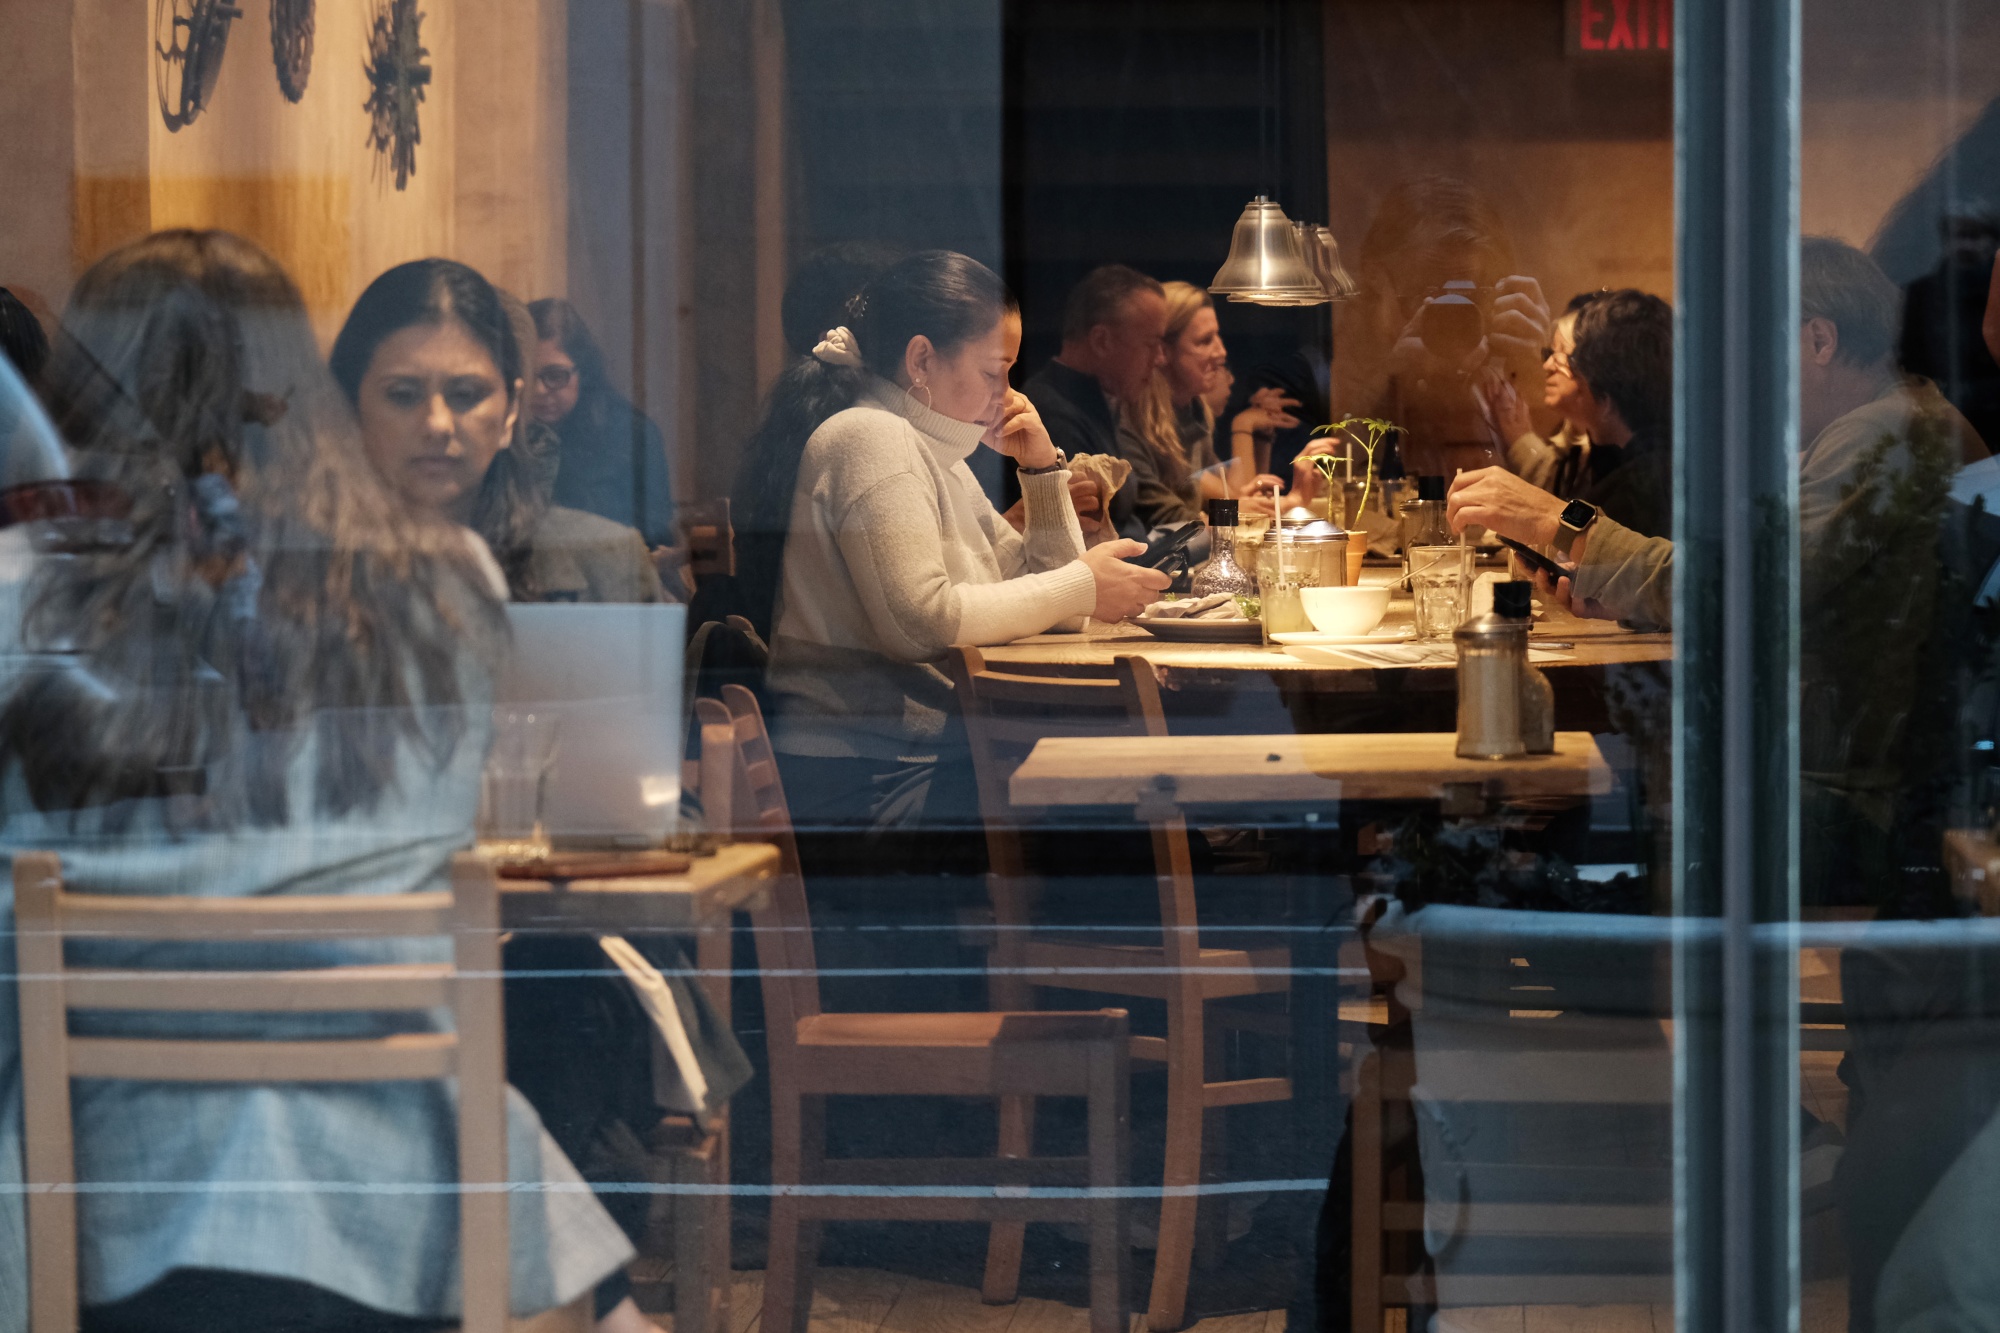 Restaurants After COVID: An Industry for the Better? - QSR Magazine